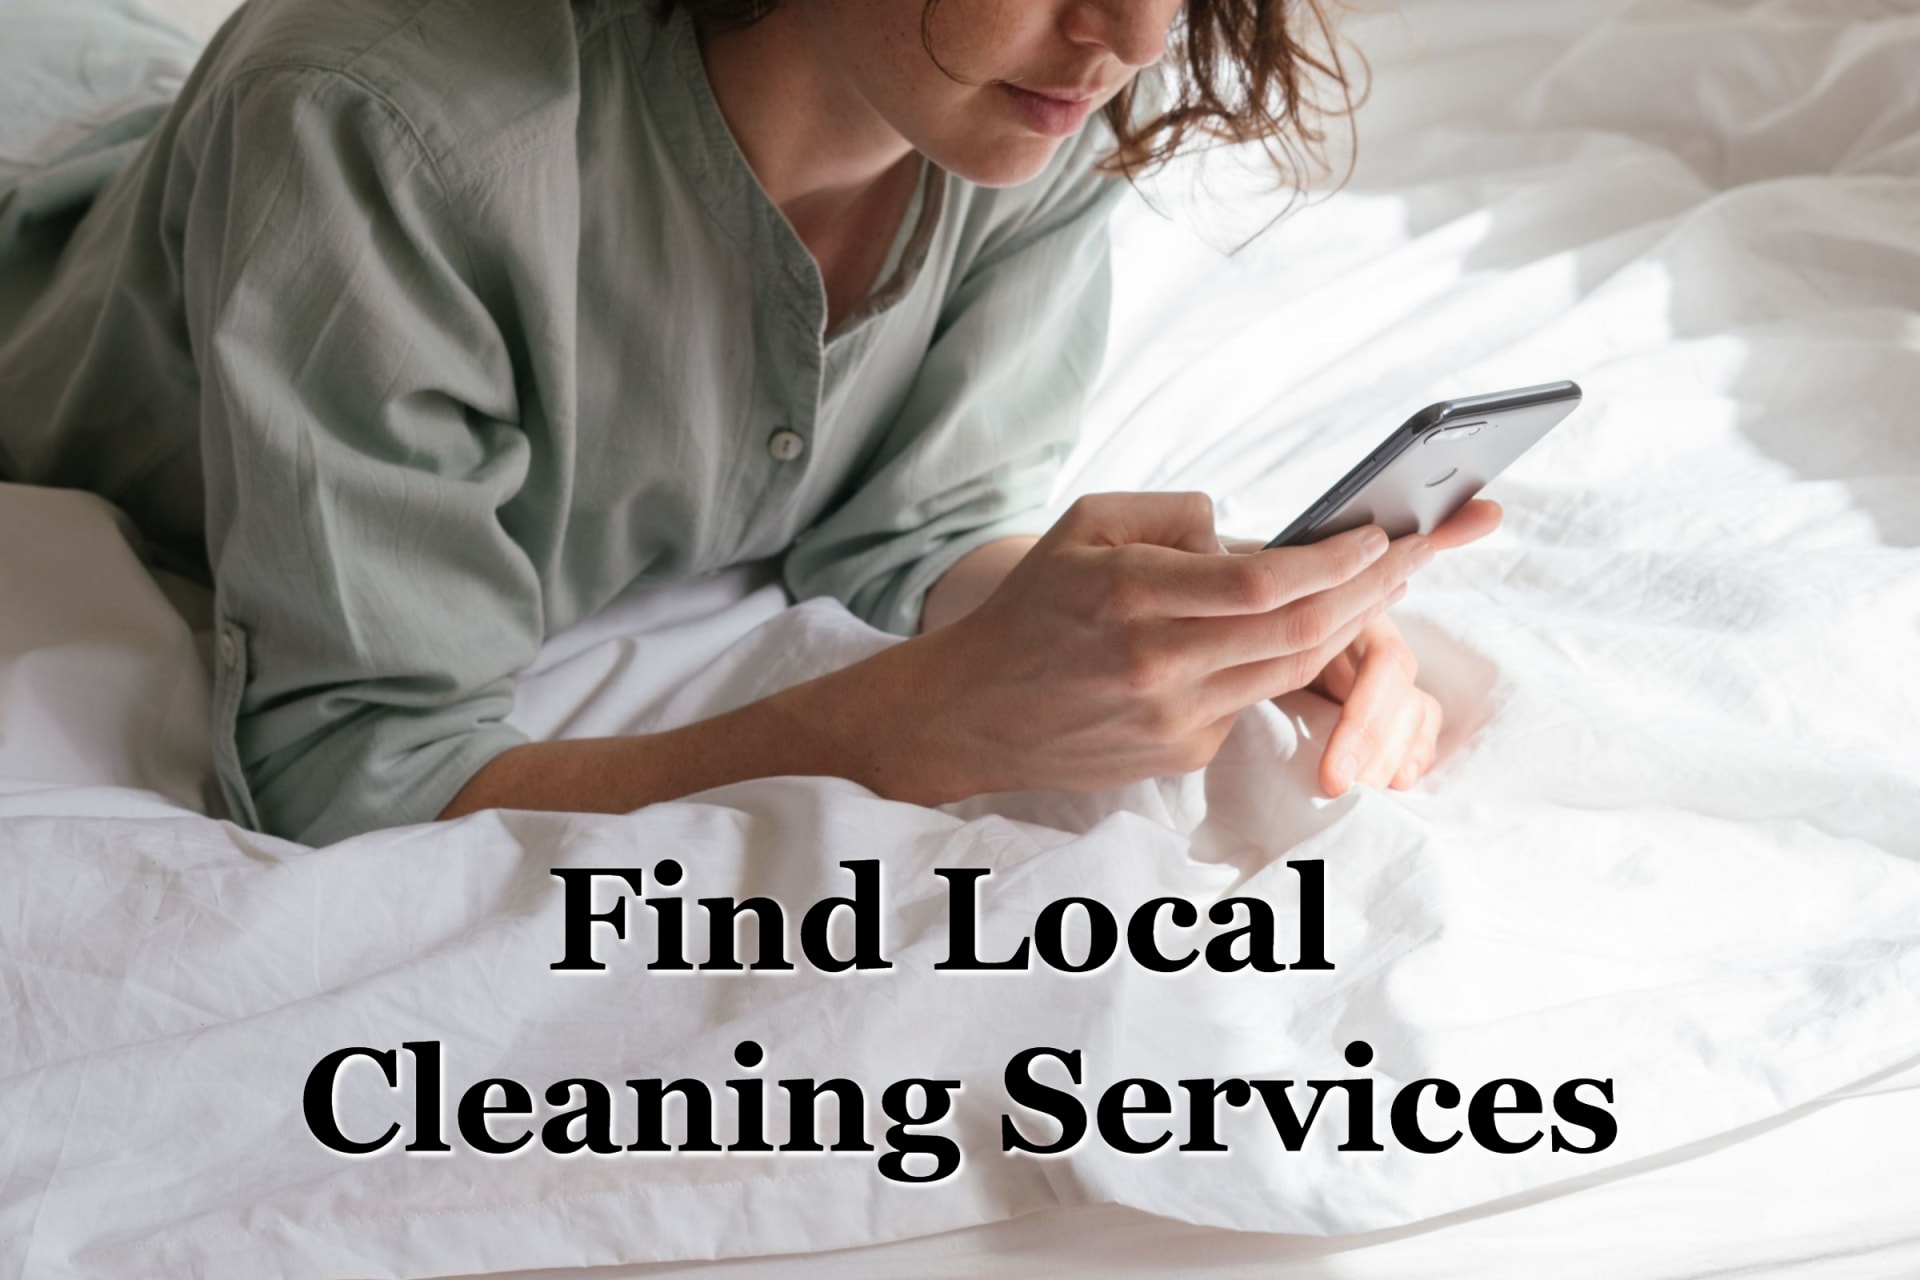 A woman looking for local cleaning services on her phone